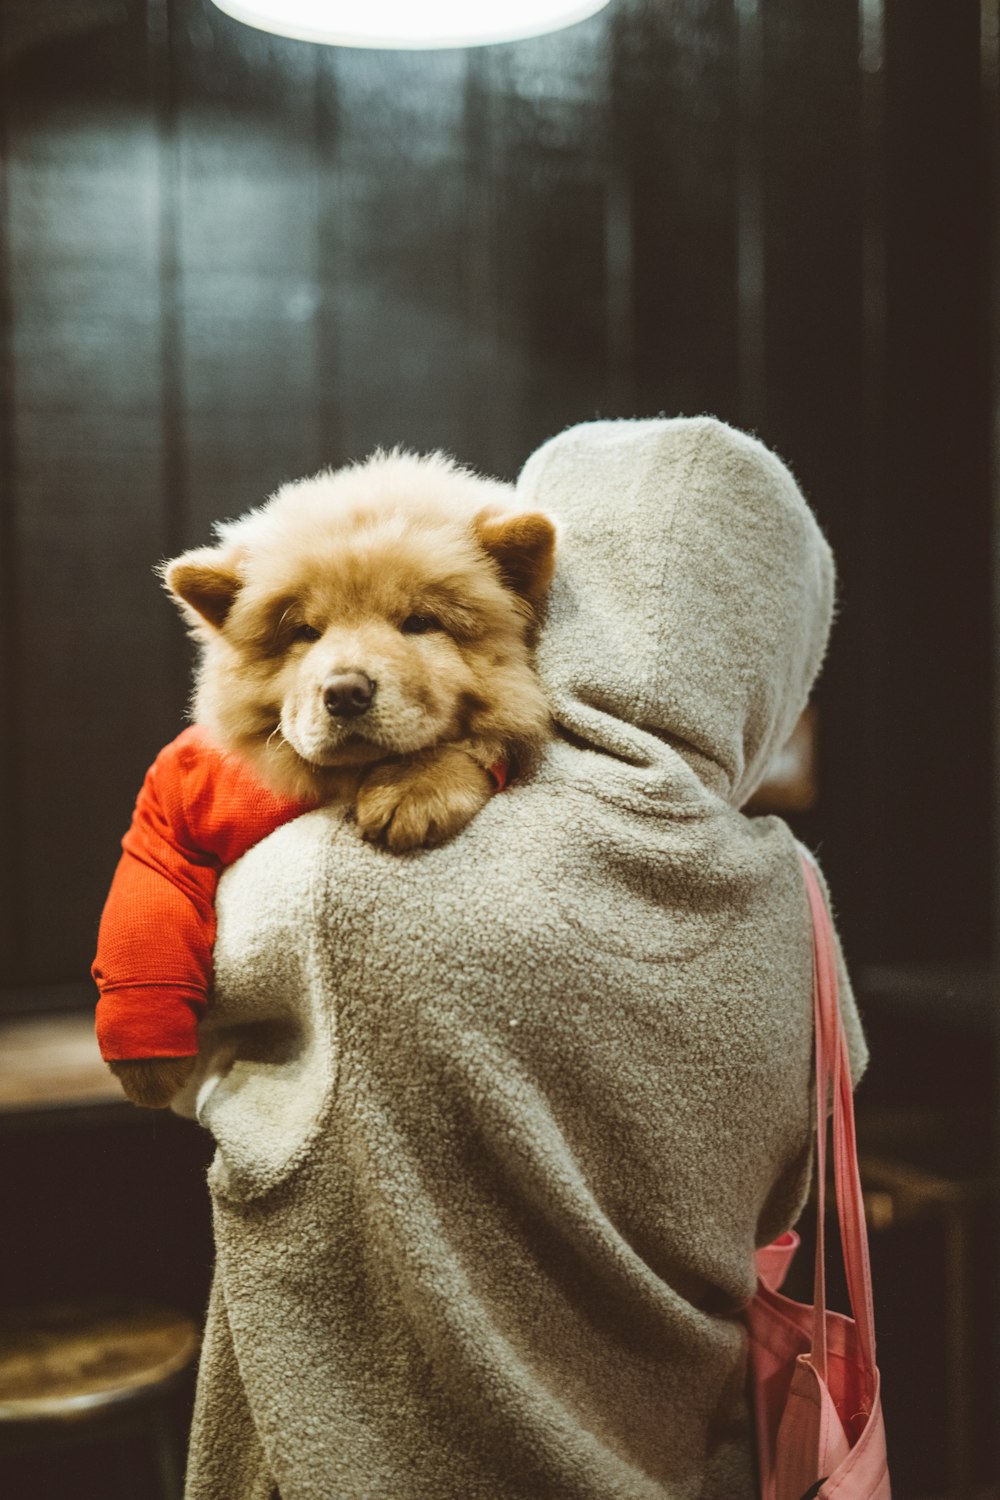 person carrying dog